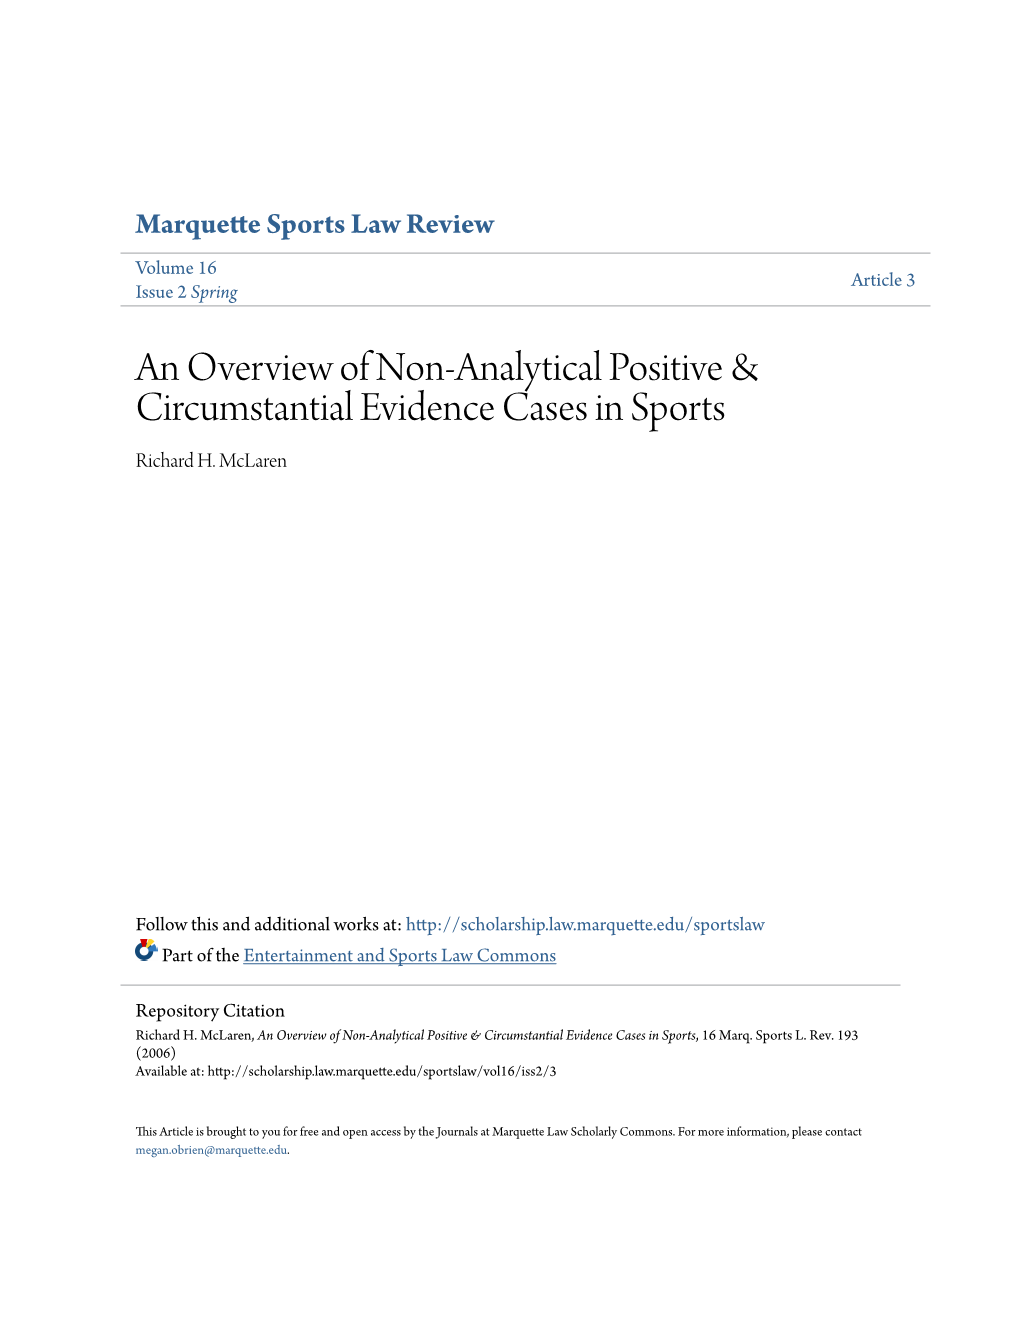 An Overview of Non-Analytical Positive & Circumstantial Evidence Cases in Sports